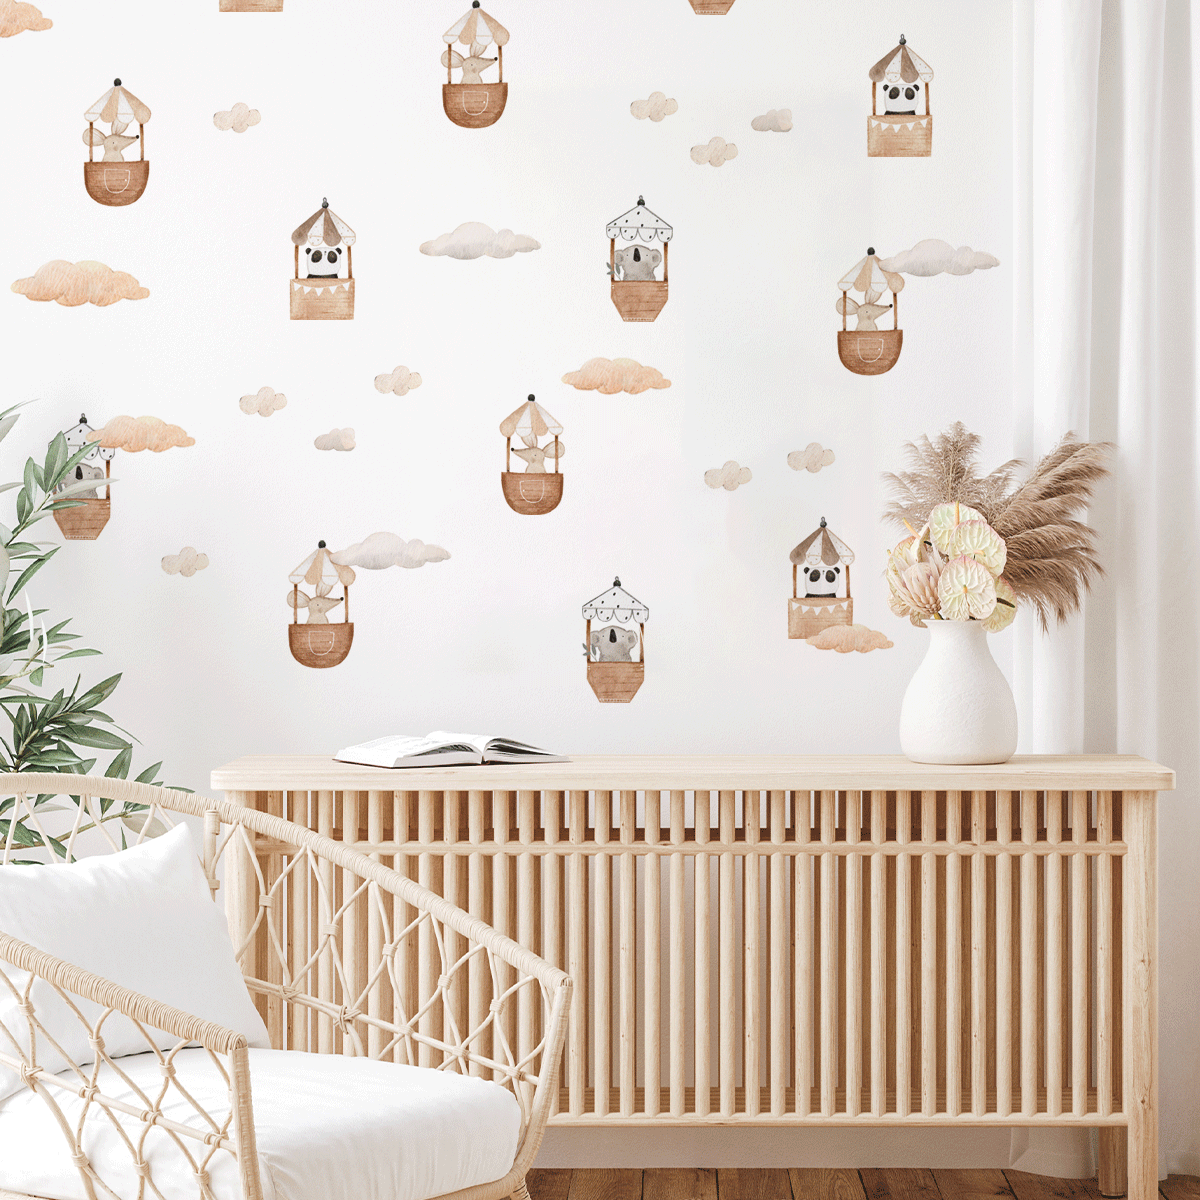 hot air balloons wall stickers, hot air balloons wall decals, forest animals wall stickers, panda bear wall stickers, boho wall stickers